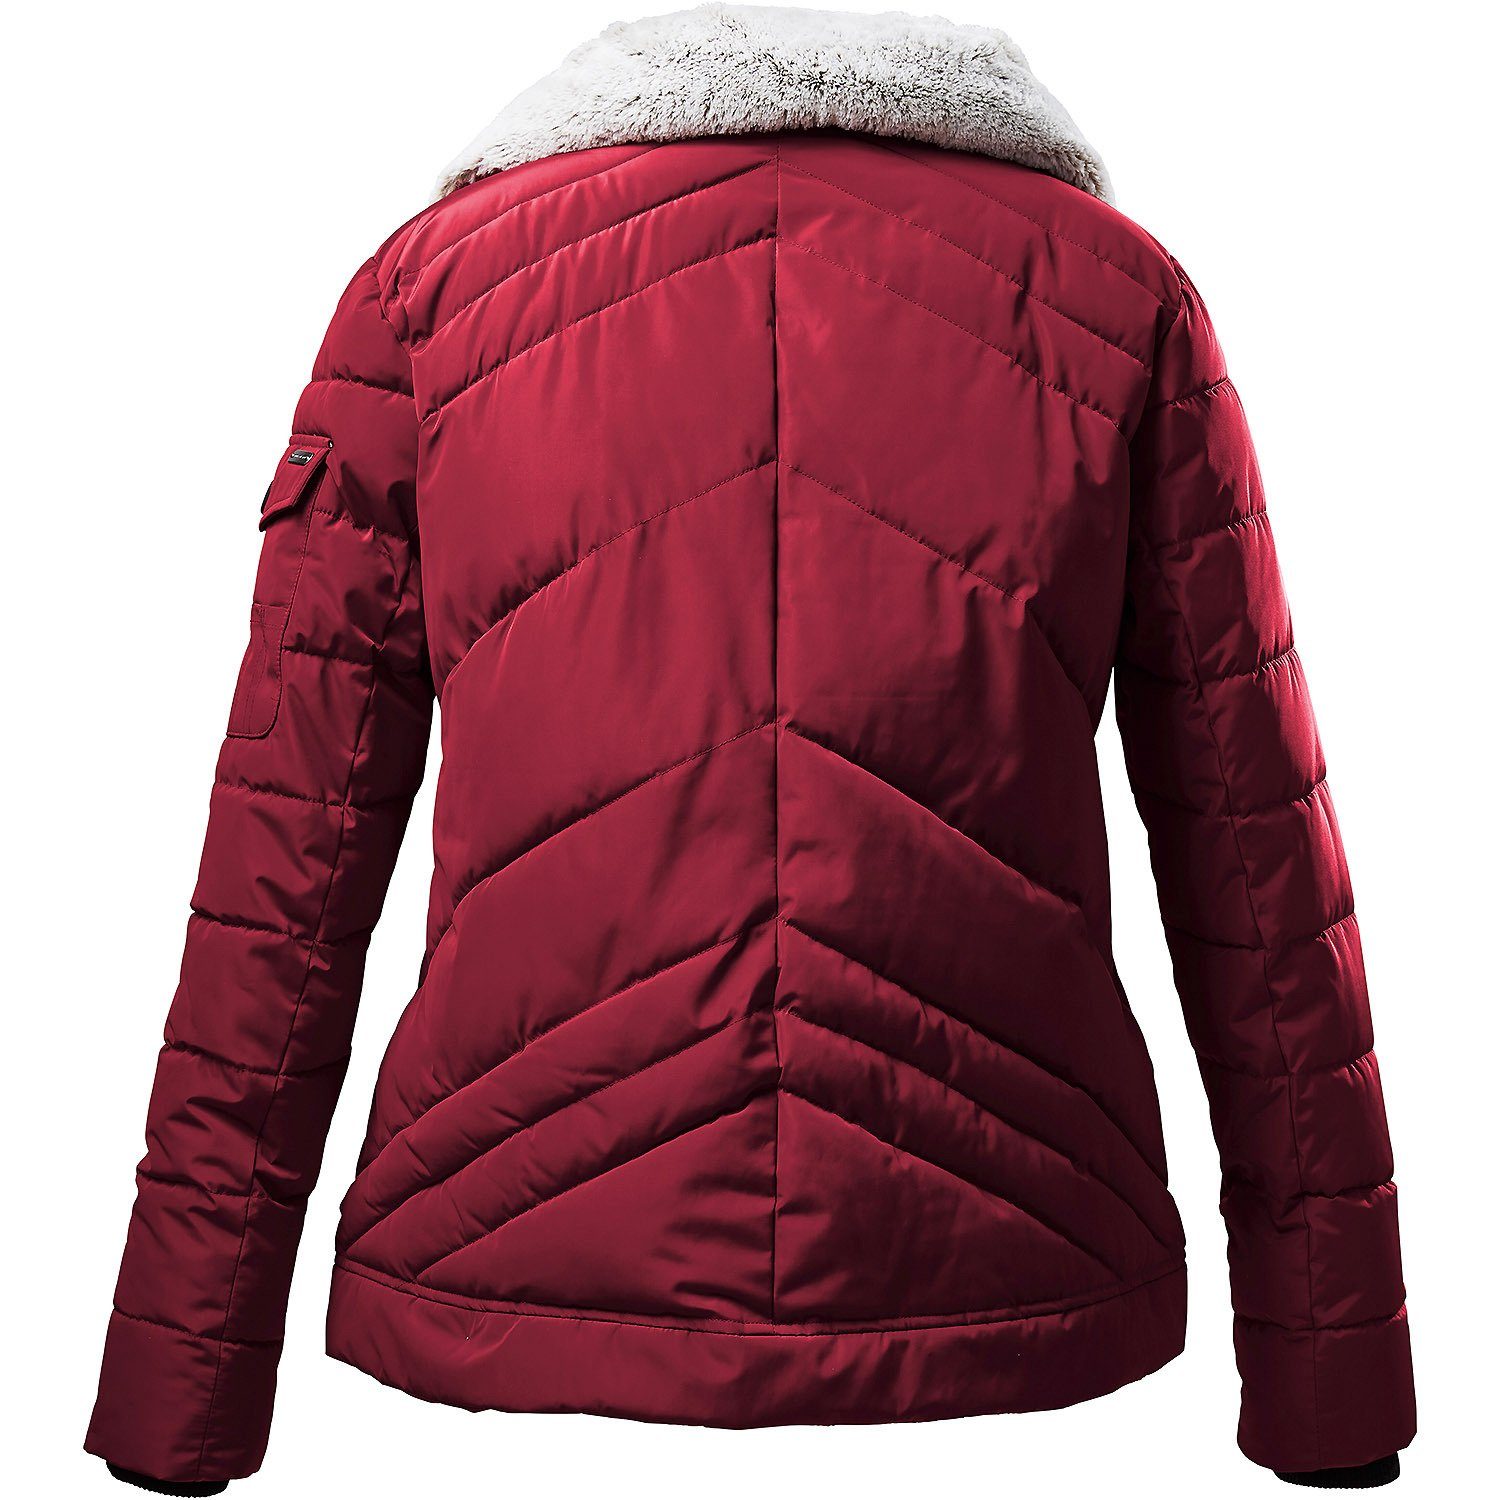 Outdoorjacke STOY Quilted Killtec Dunkelrot Jacke A